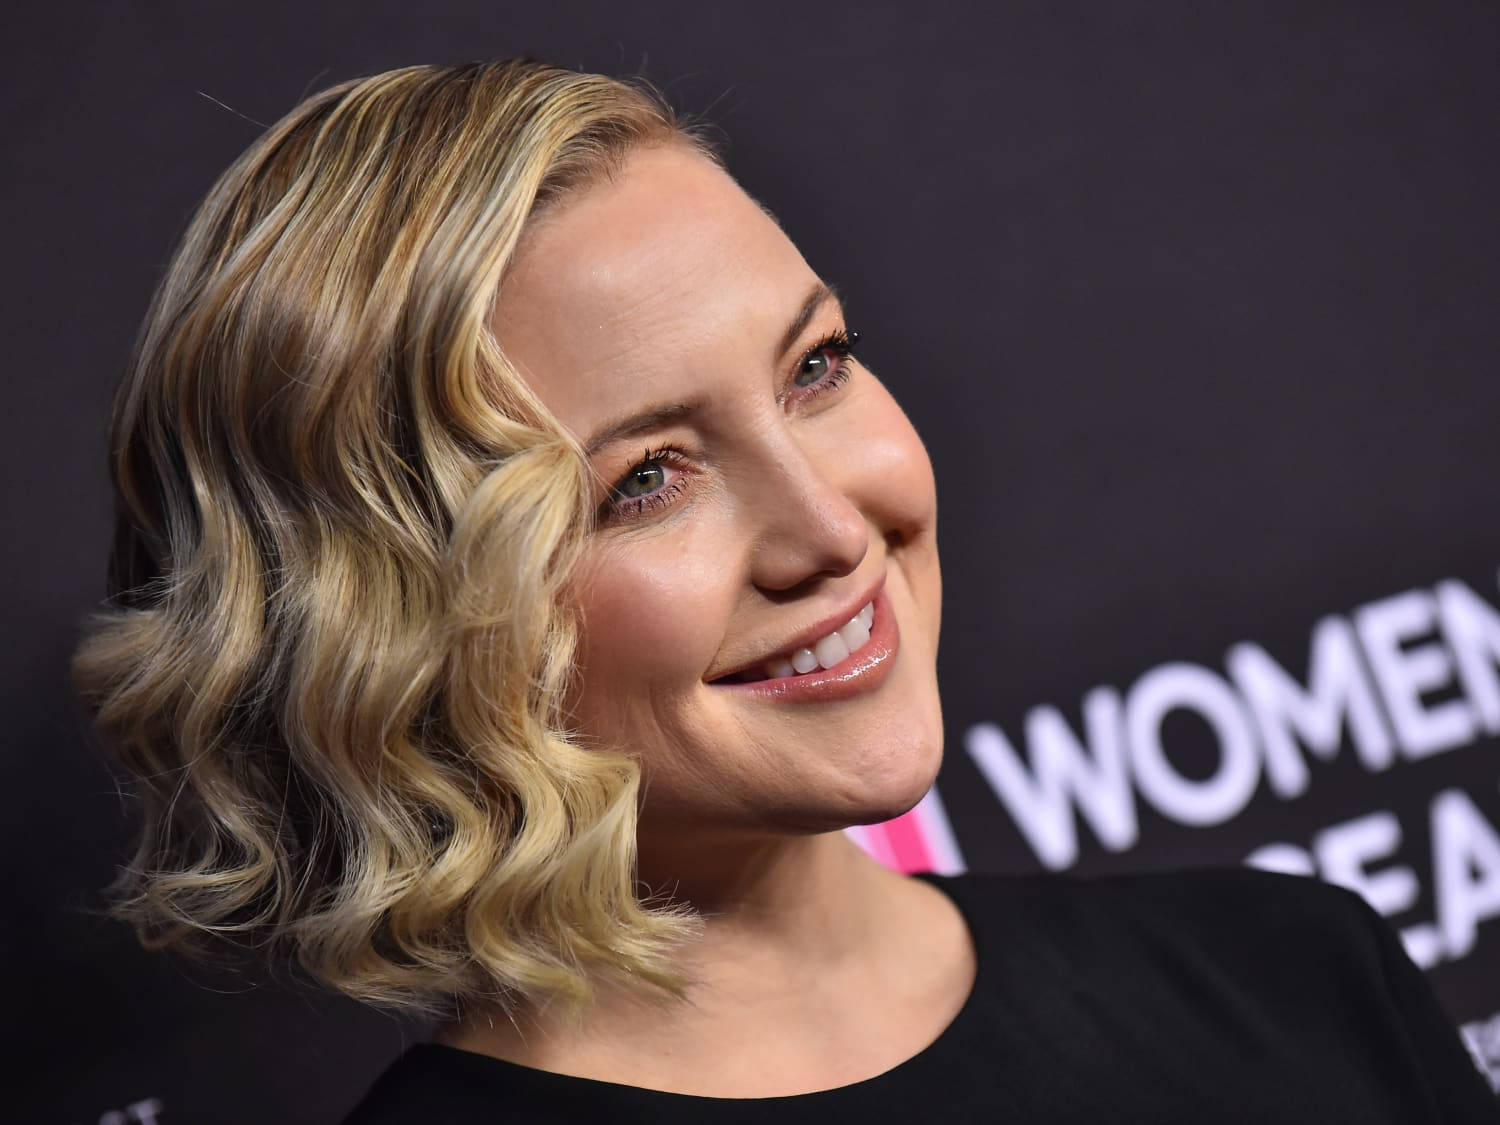 A Stunning Image Of Actress Kate Hudson And Her Short Blonde Hair While Candidly Smiling